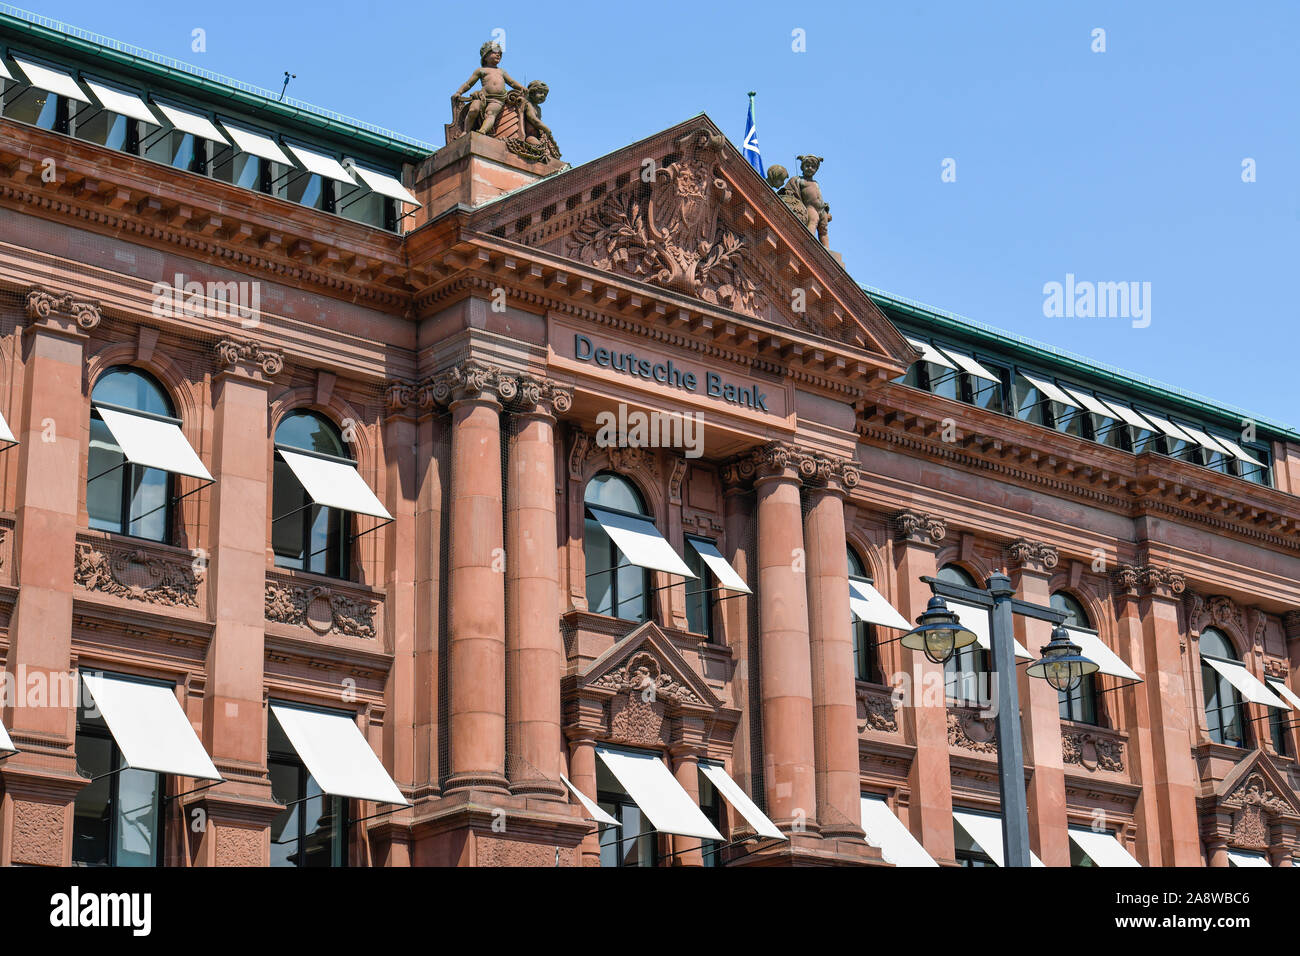 Bank Filiale High Resolution Stock Photography and Images - Alamy